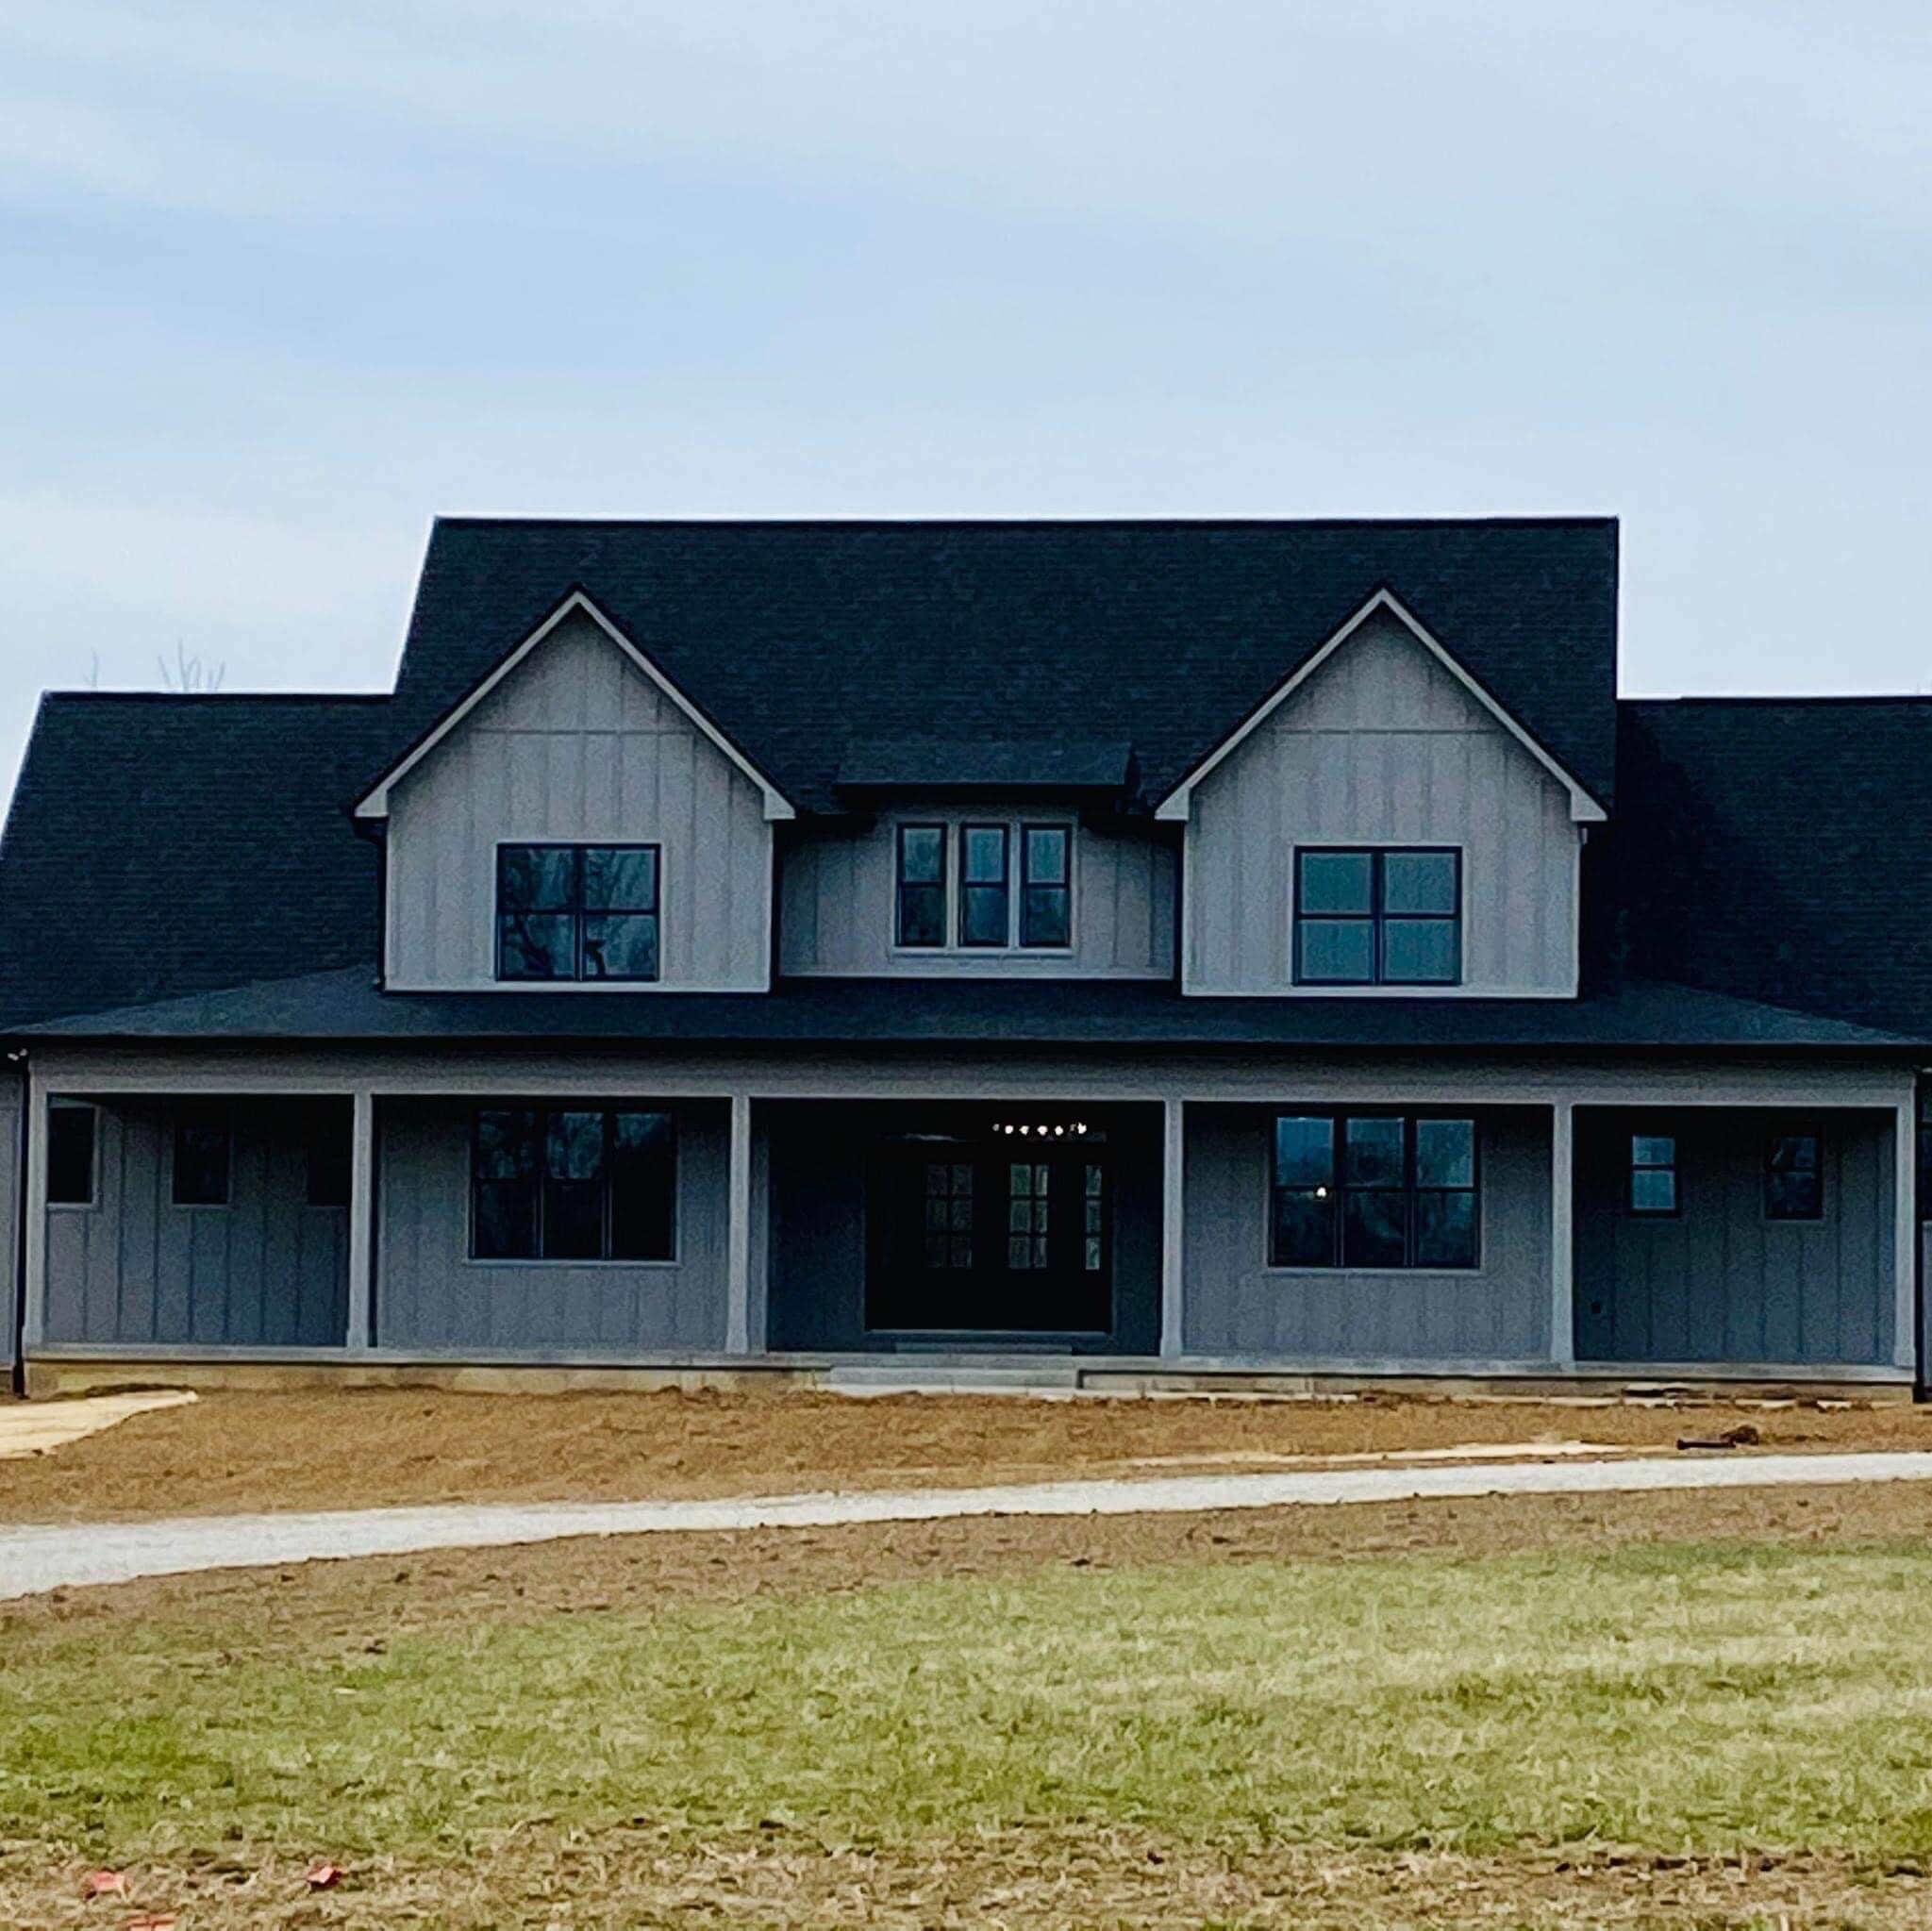 Recently finished new home construction